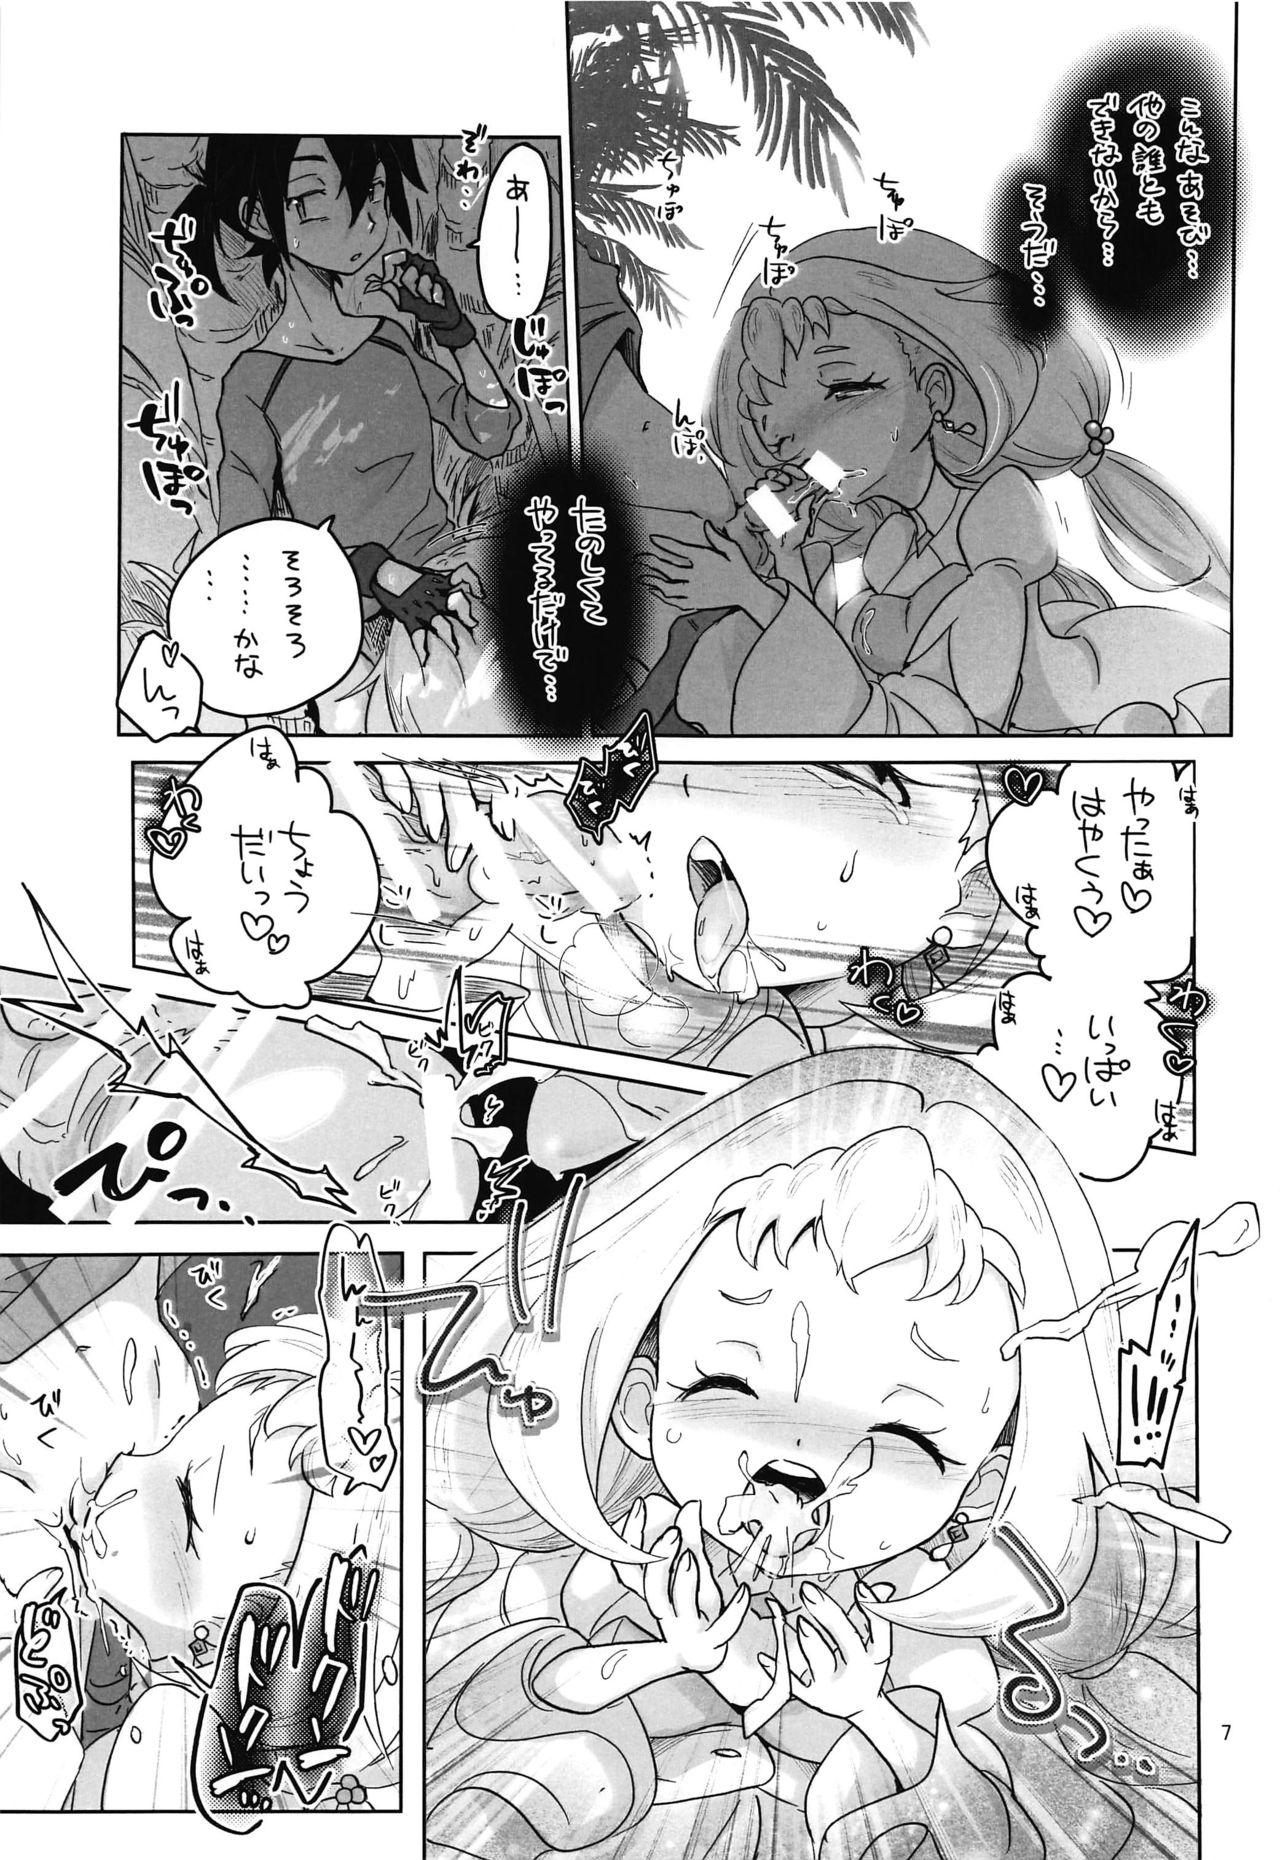 Japanese Comin' Thro' the DAYDREAM - Gundam build divers Fucking Pussy - Page 6